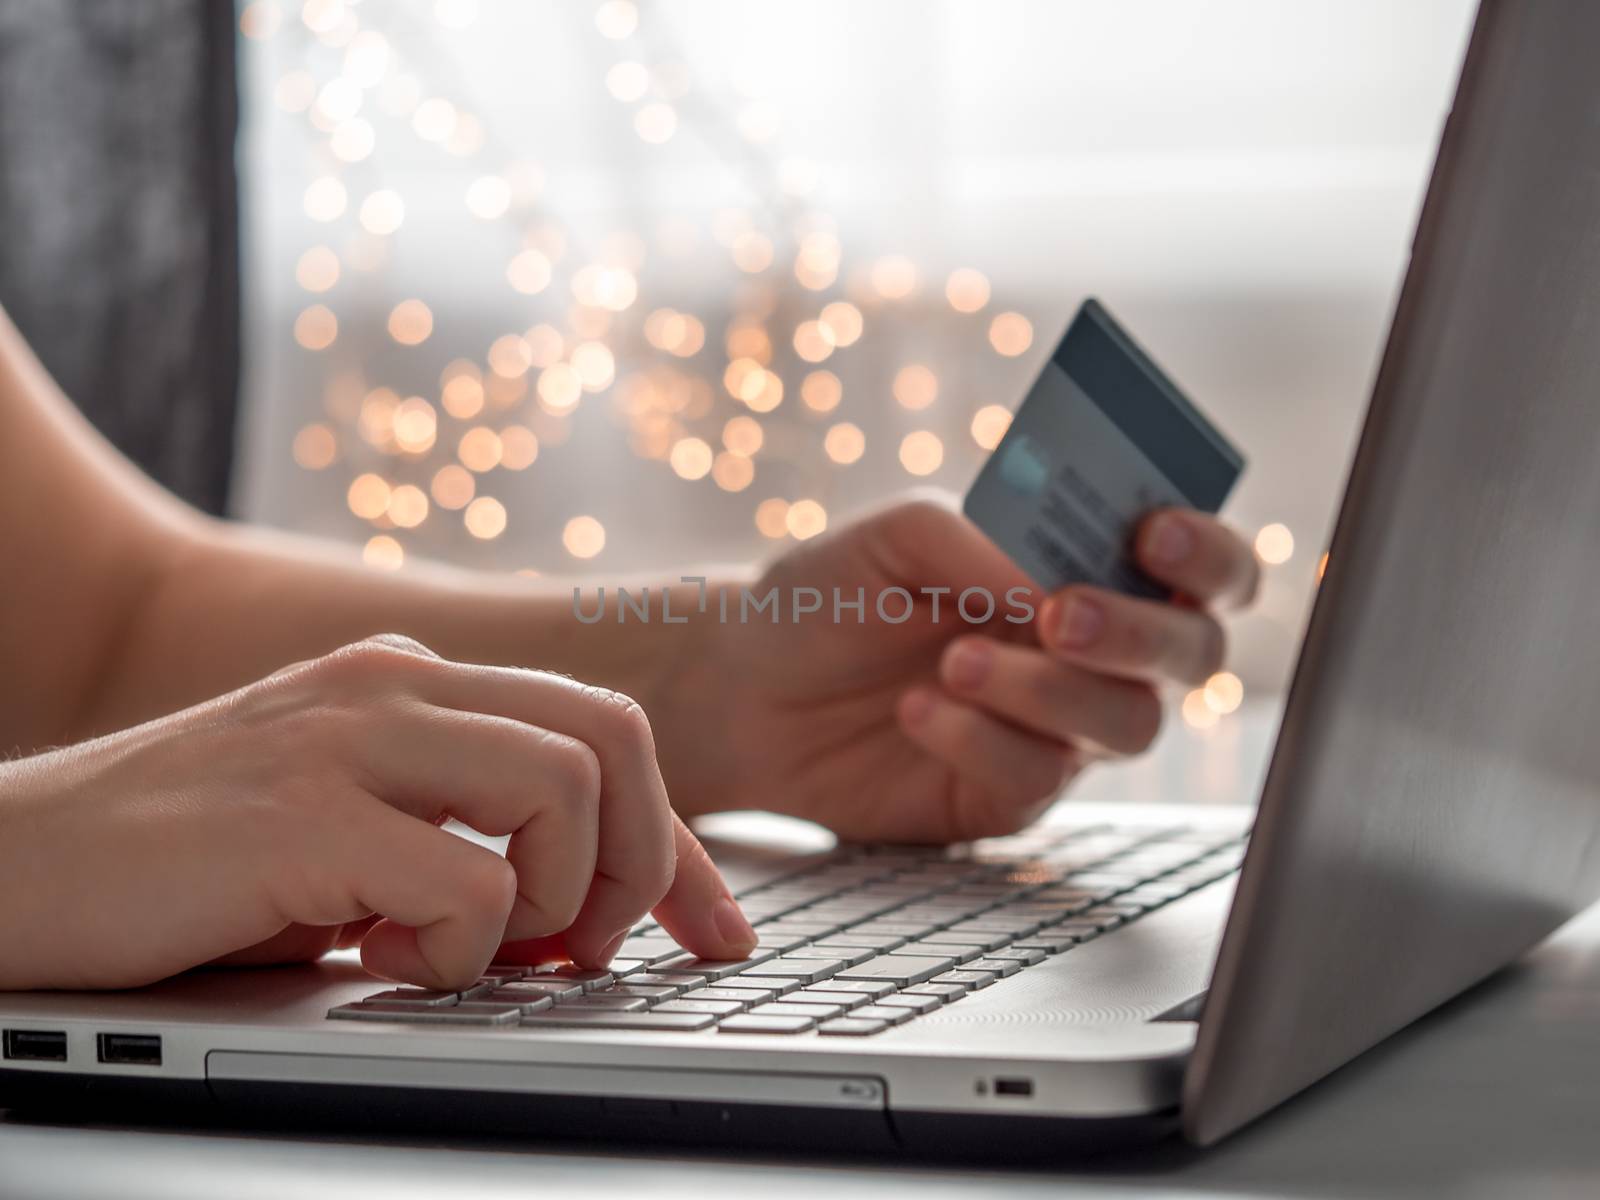 Cristmas online shopping soncept. Close-up woman's hands holding credit card and inputting card information using laptop keyboard for online shopping with festive lighting chain bokeh.